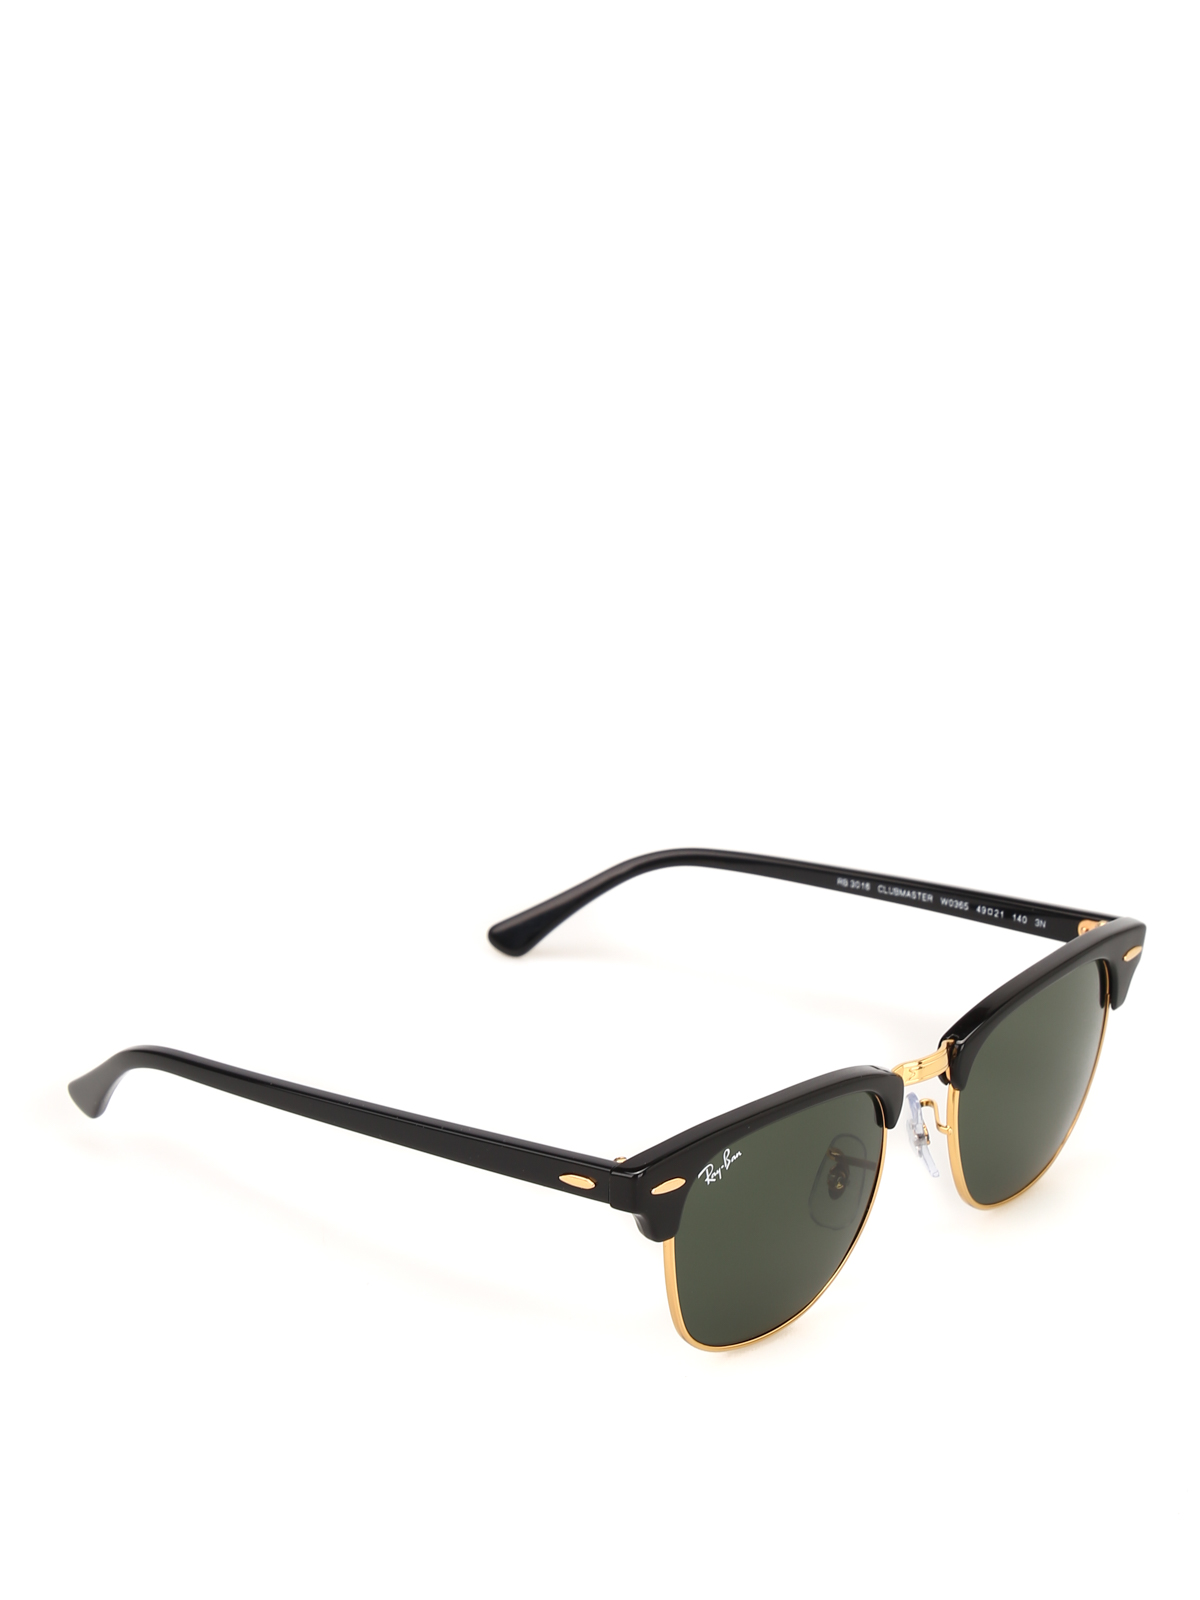 Ray Ban Clubmaster Classic Sunglasses In Black